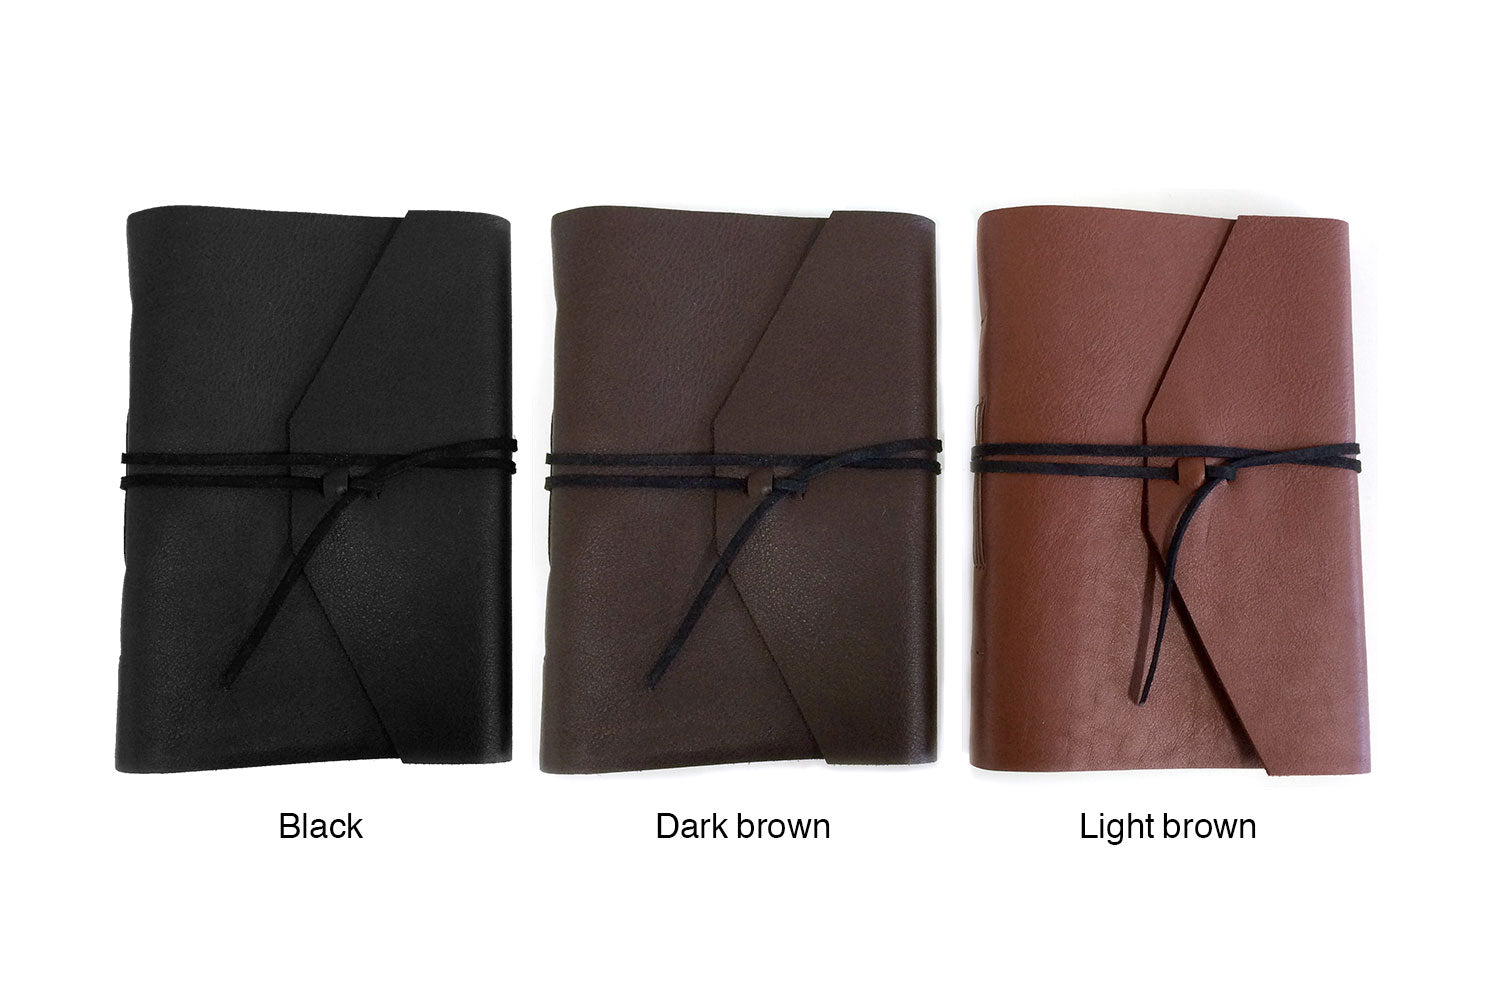 Men's journal in black leather, dark leather and light brown leather from Bookshell bindery